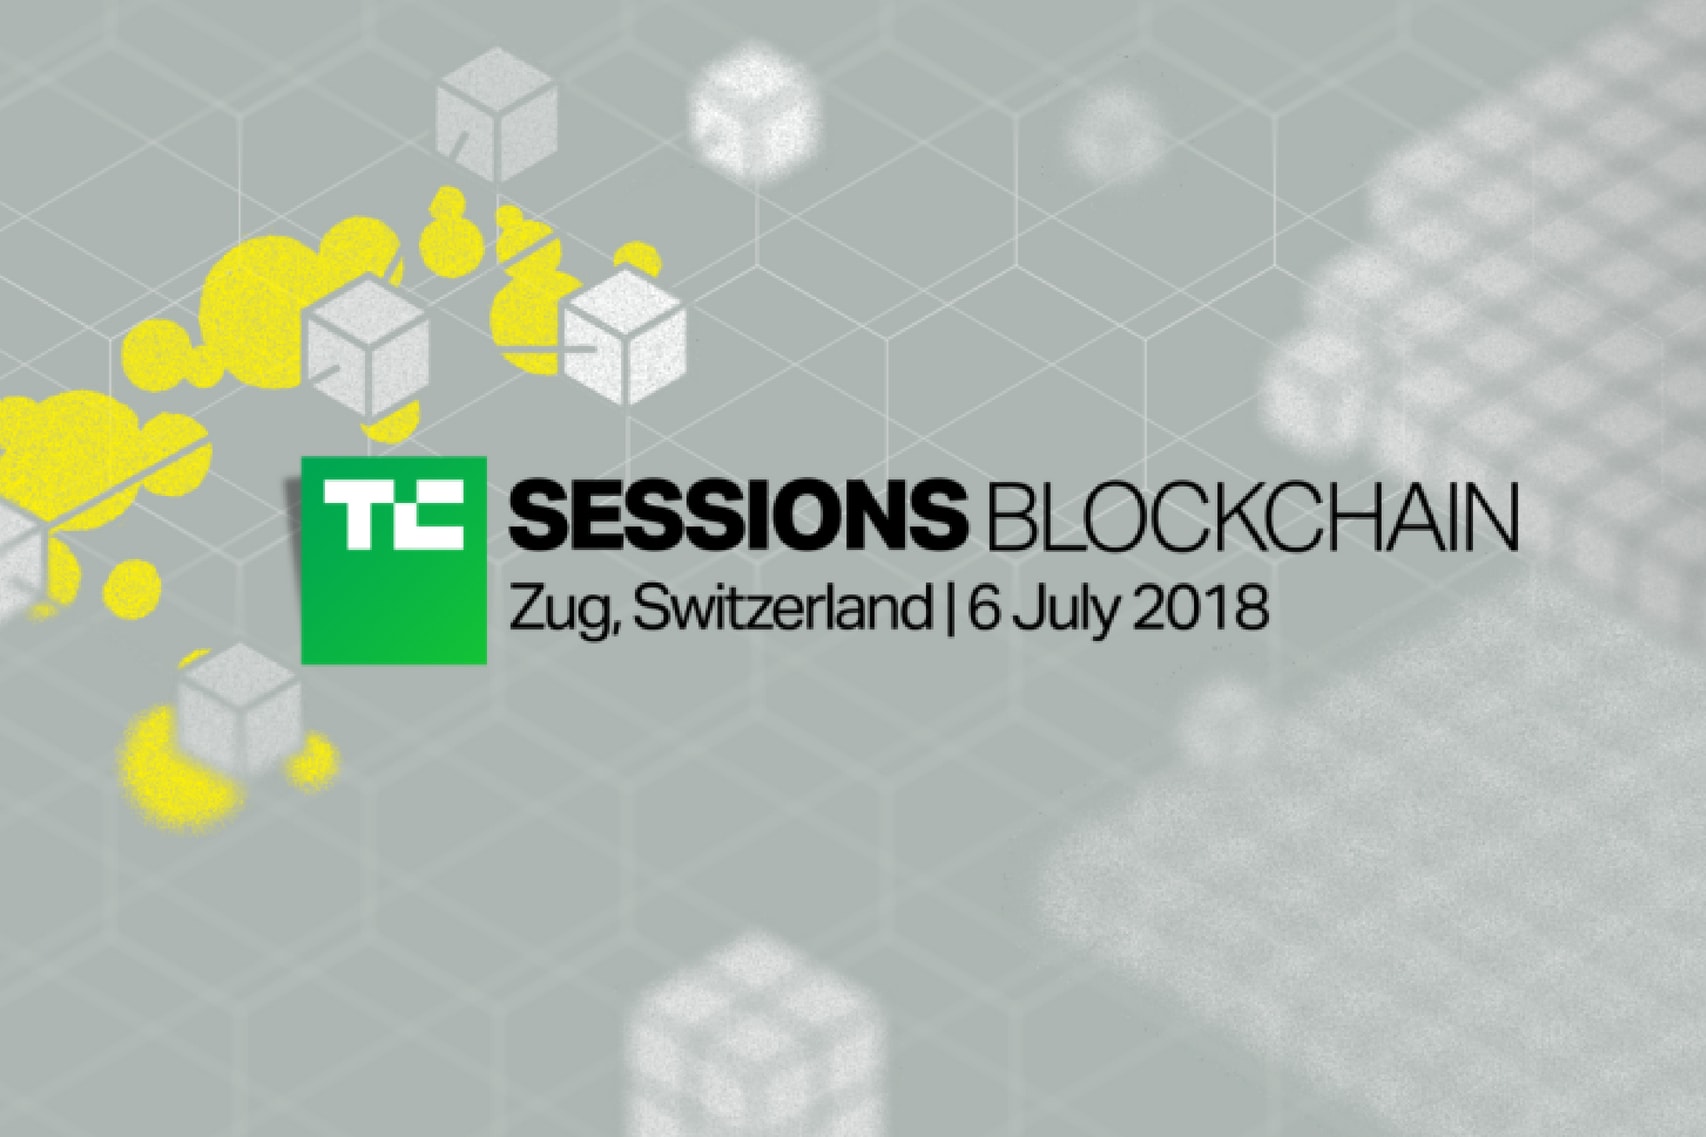 Key Insights from TechCrunch Sessions: Blockchain in Zug